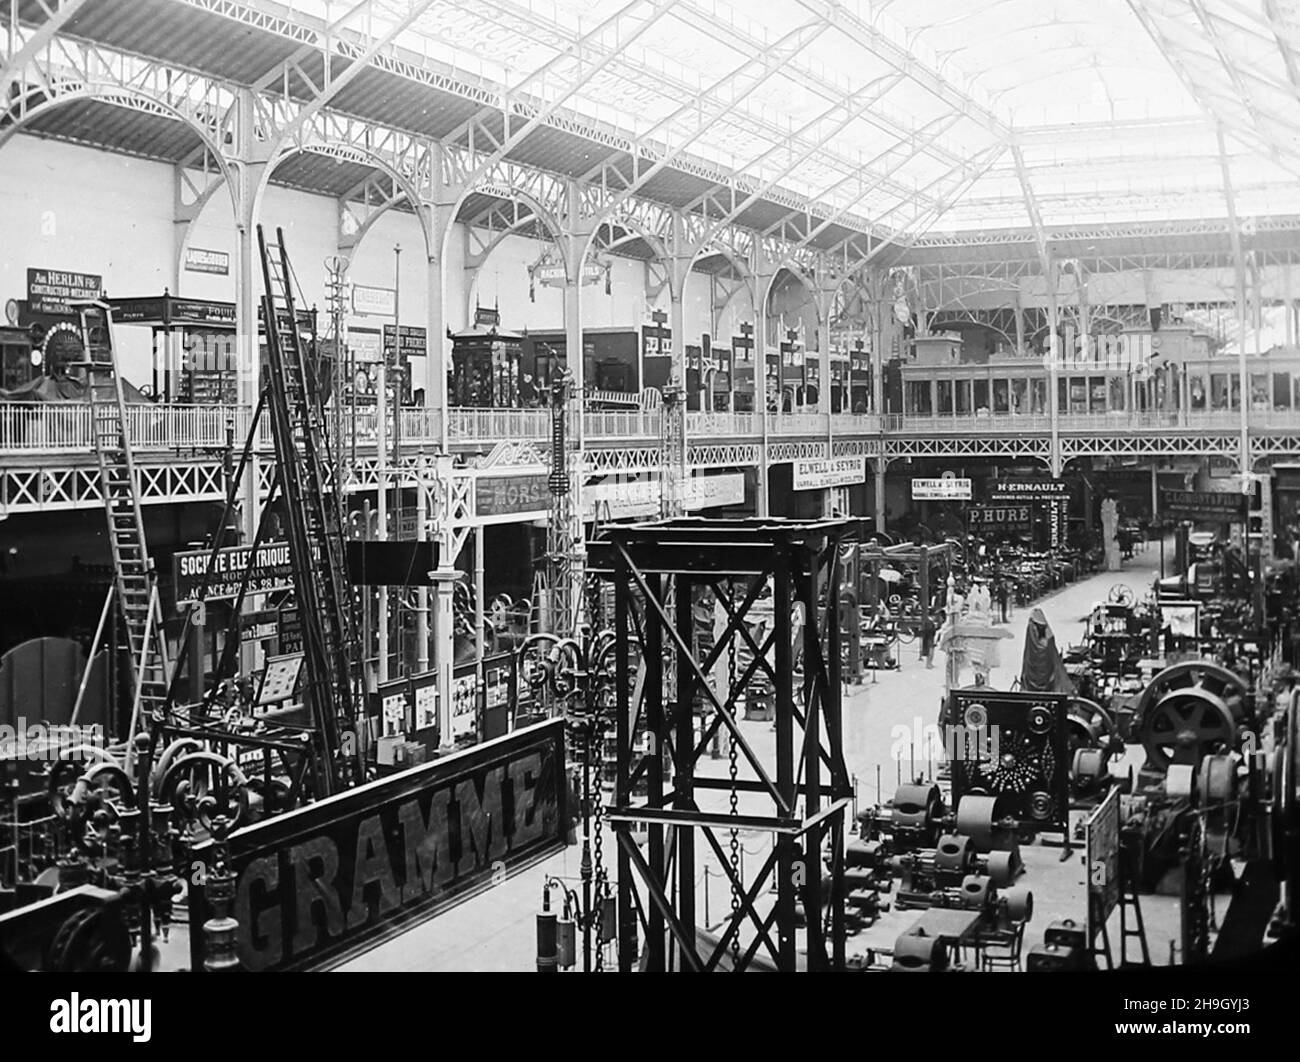 Electrical Machinery Hall, 1900 Exposition Universelle, Parigi, Francia Foto Stock